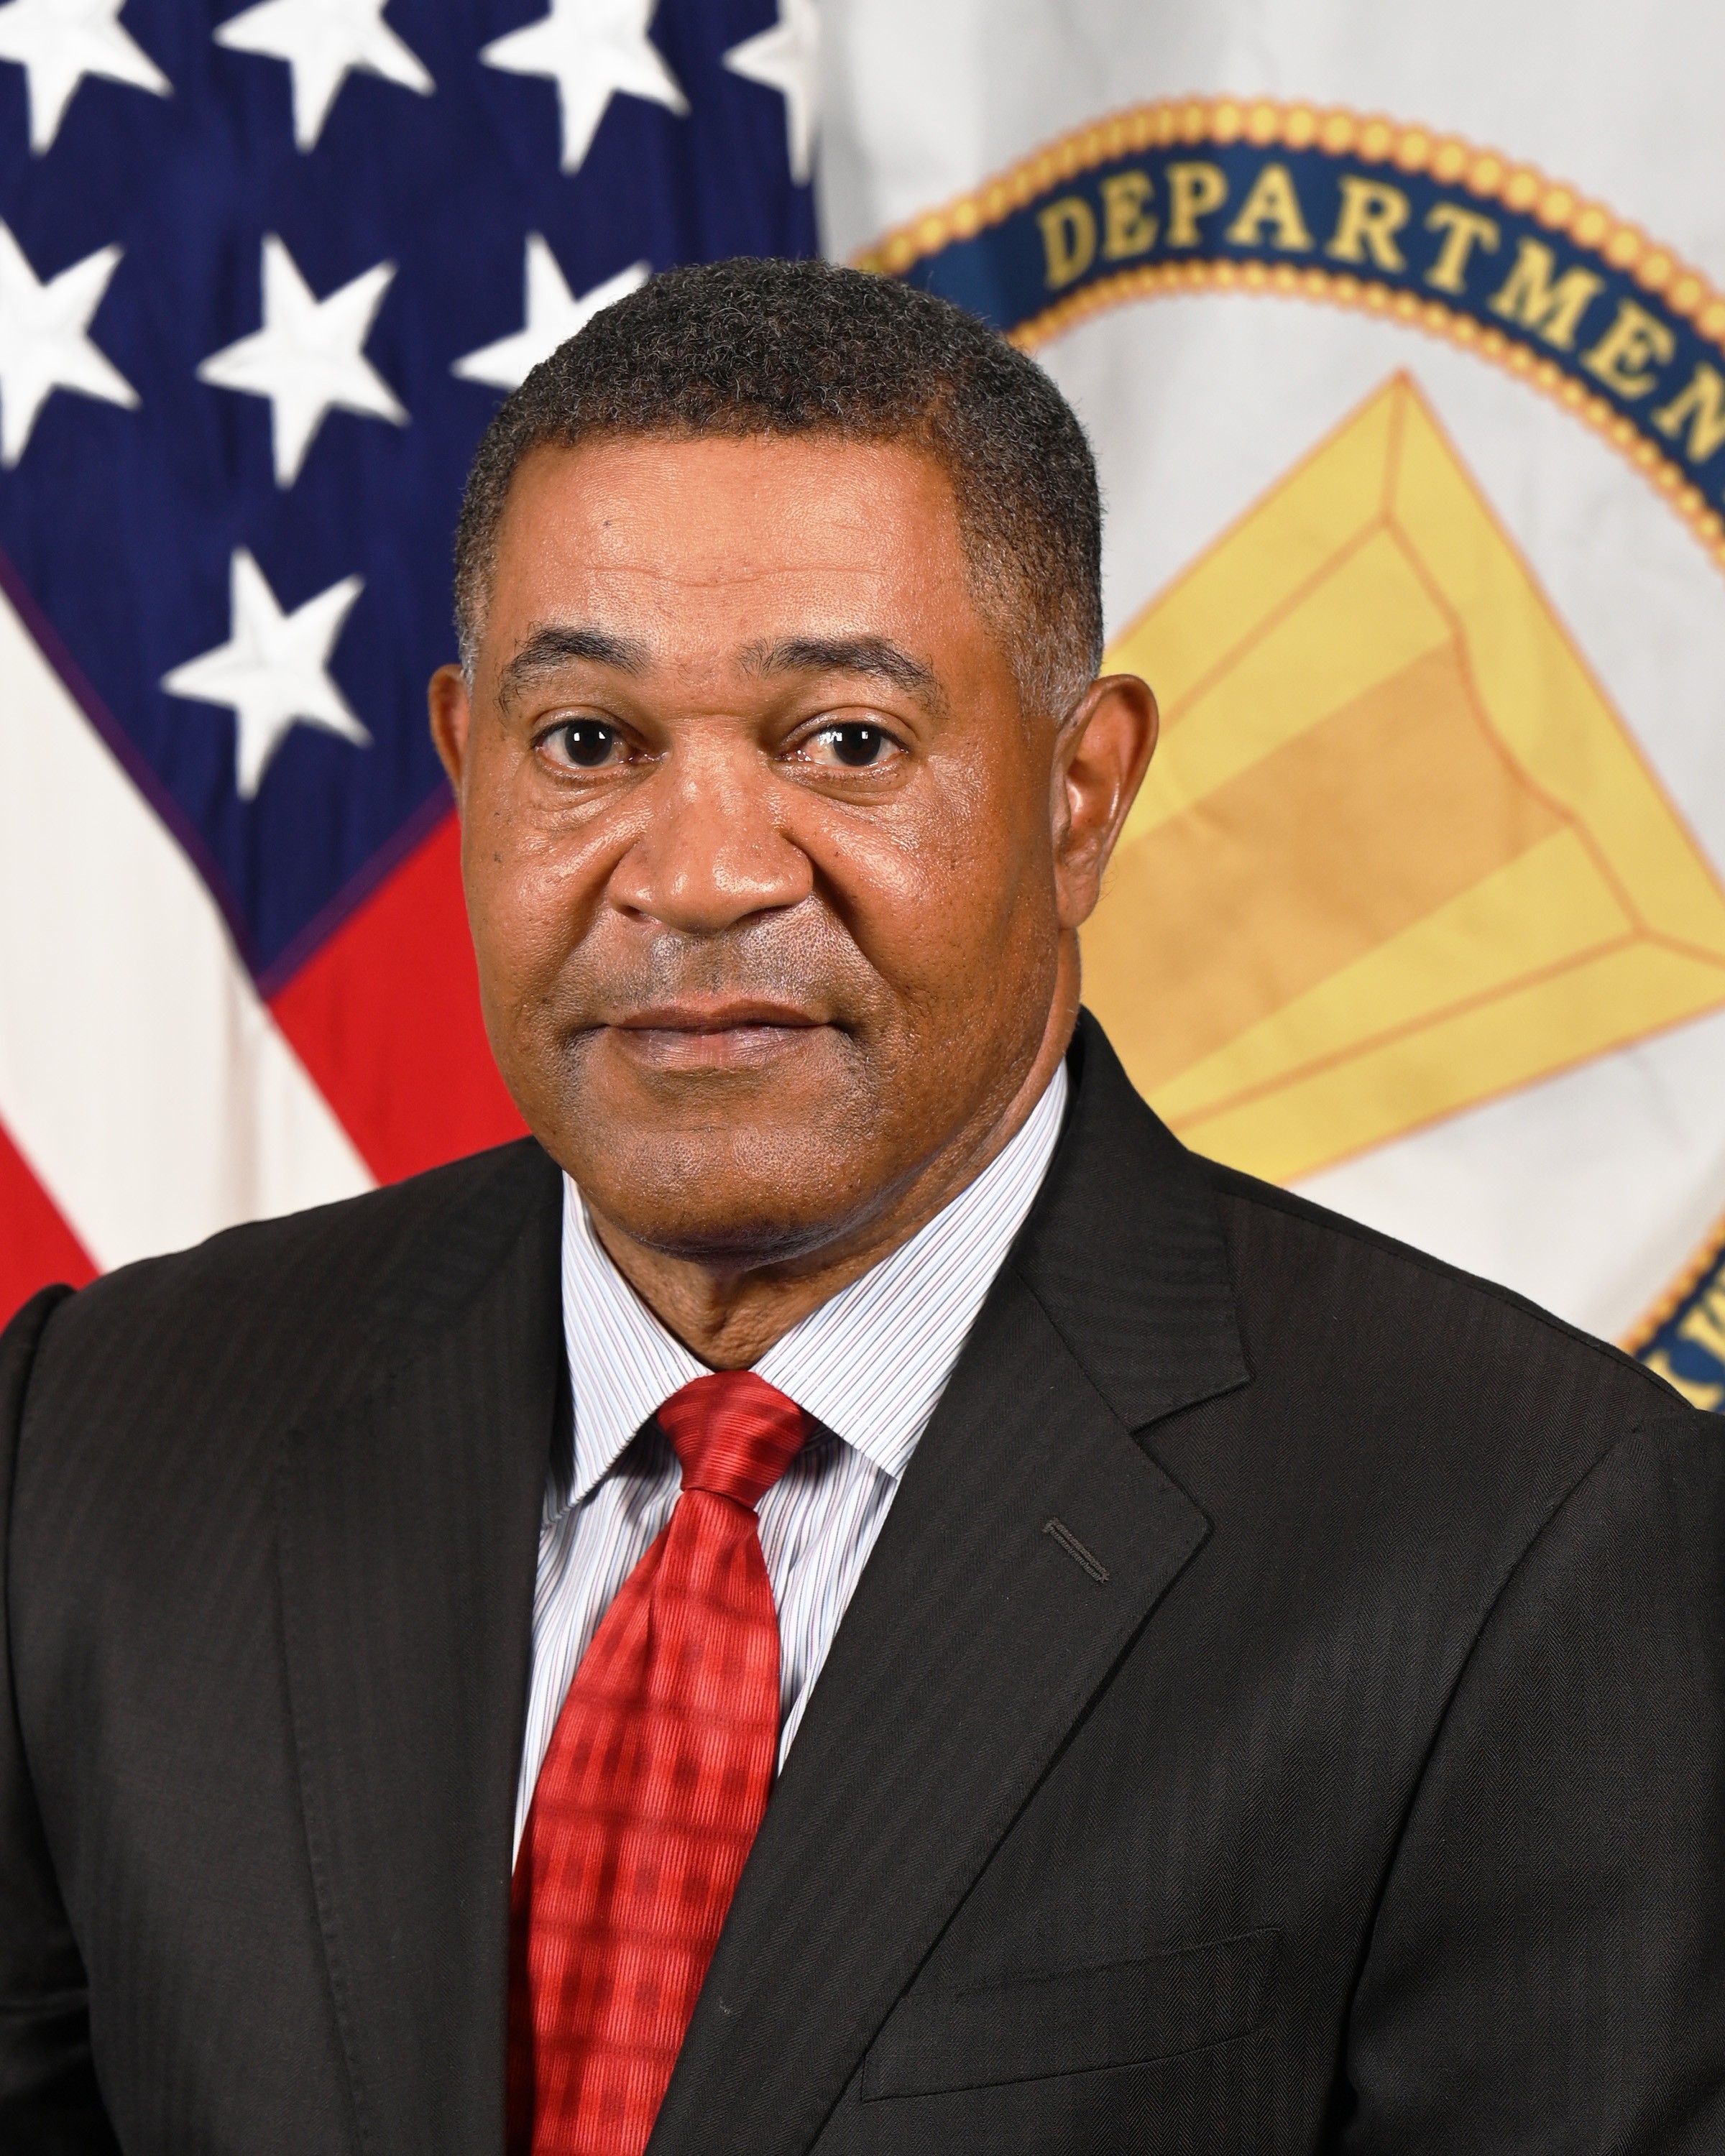 Principal Deputy to the Assistant Secretary of the Army Financial Management & Comptroller